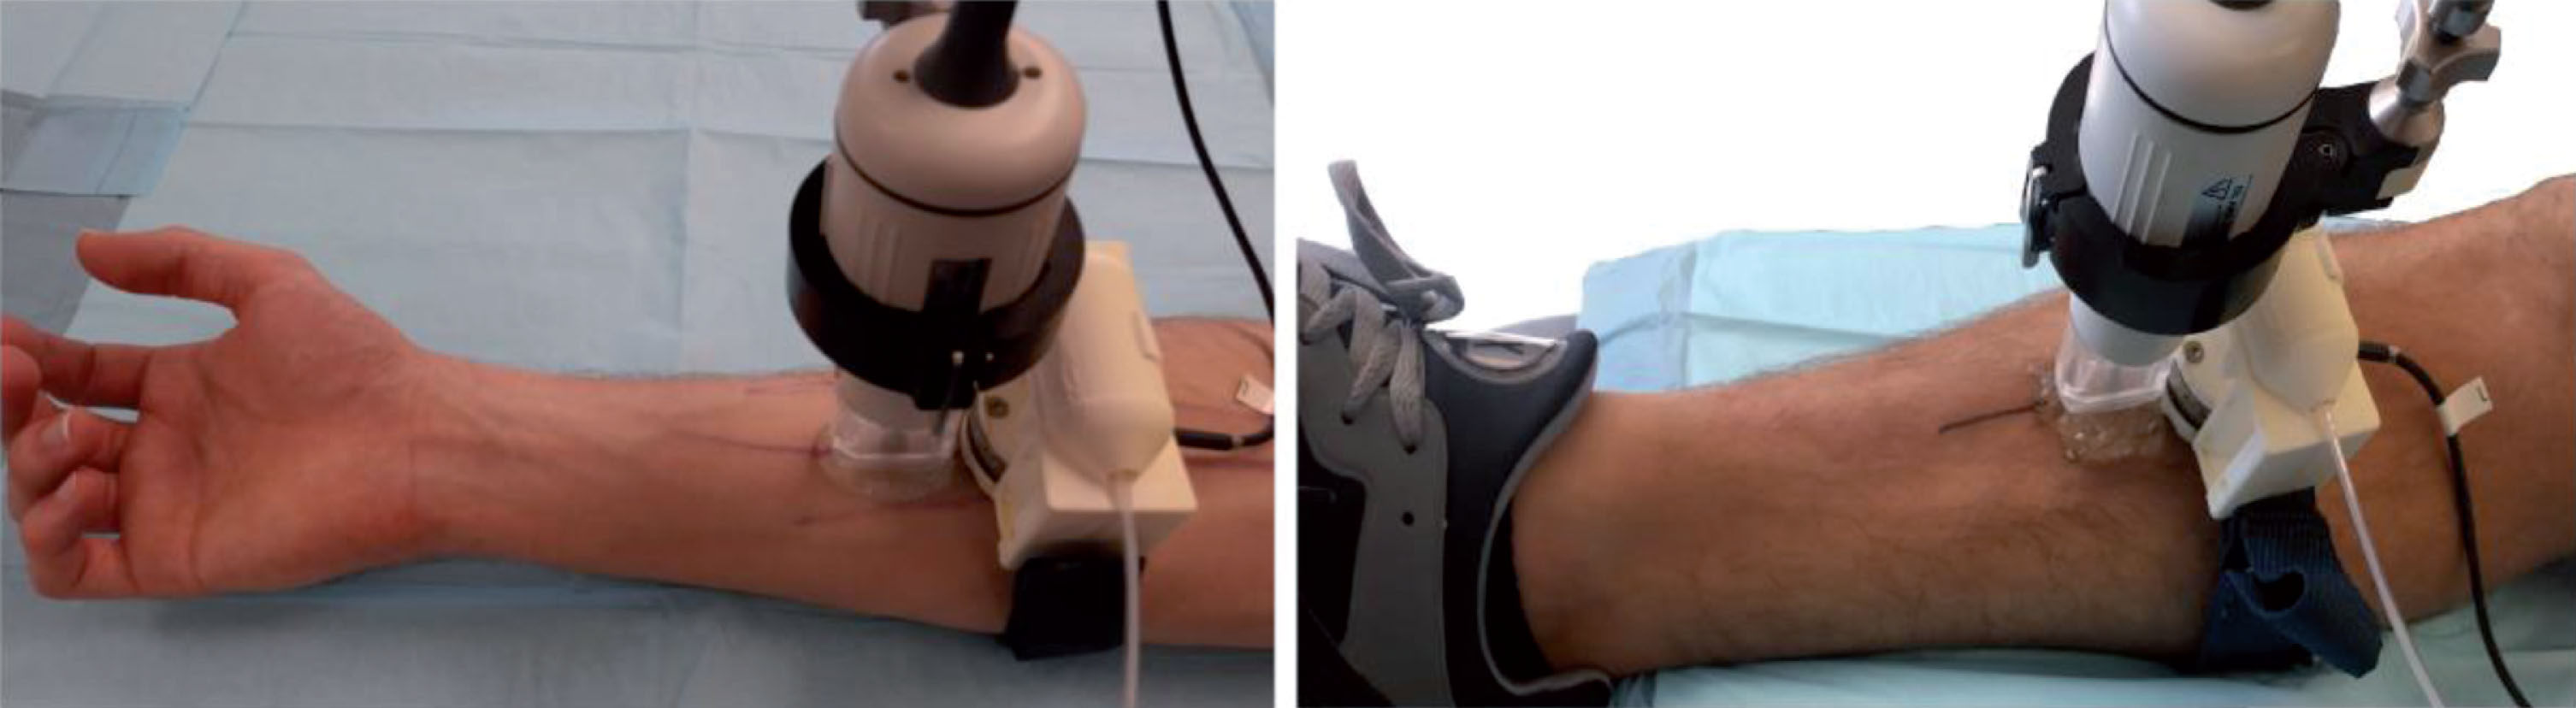 Picture showing the load cell mounted on the pneumatic bracelet device, the venous architecture of the forearm and leg marked with ink, and the Visualsonics ultrasound probe RMV-703 positioned over the region of the measure.